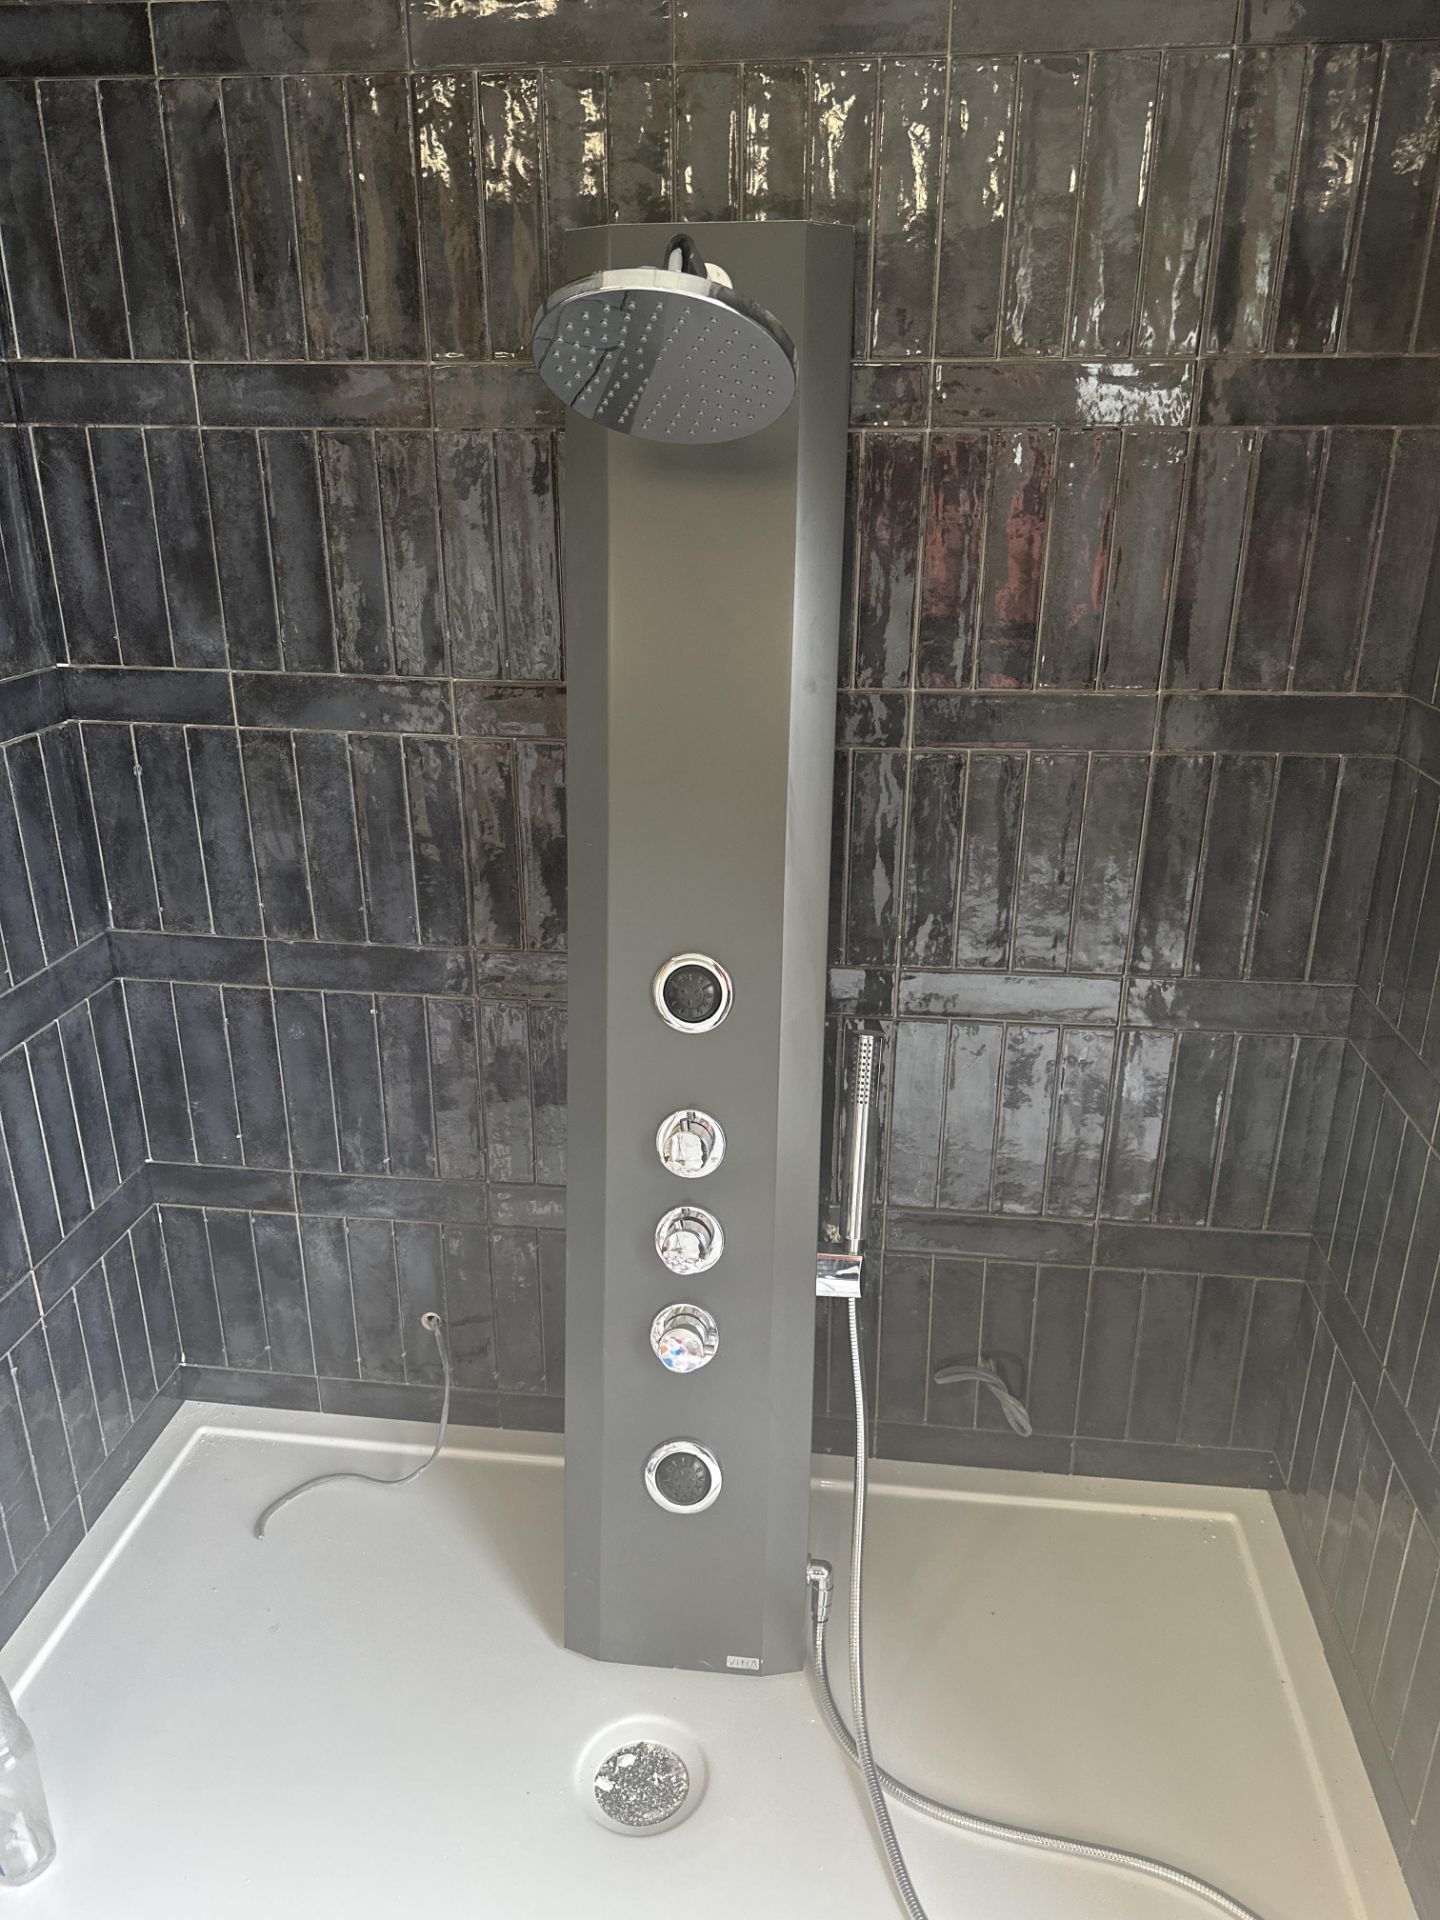 1 x Vitra move shower system in anthracite